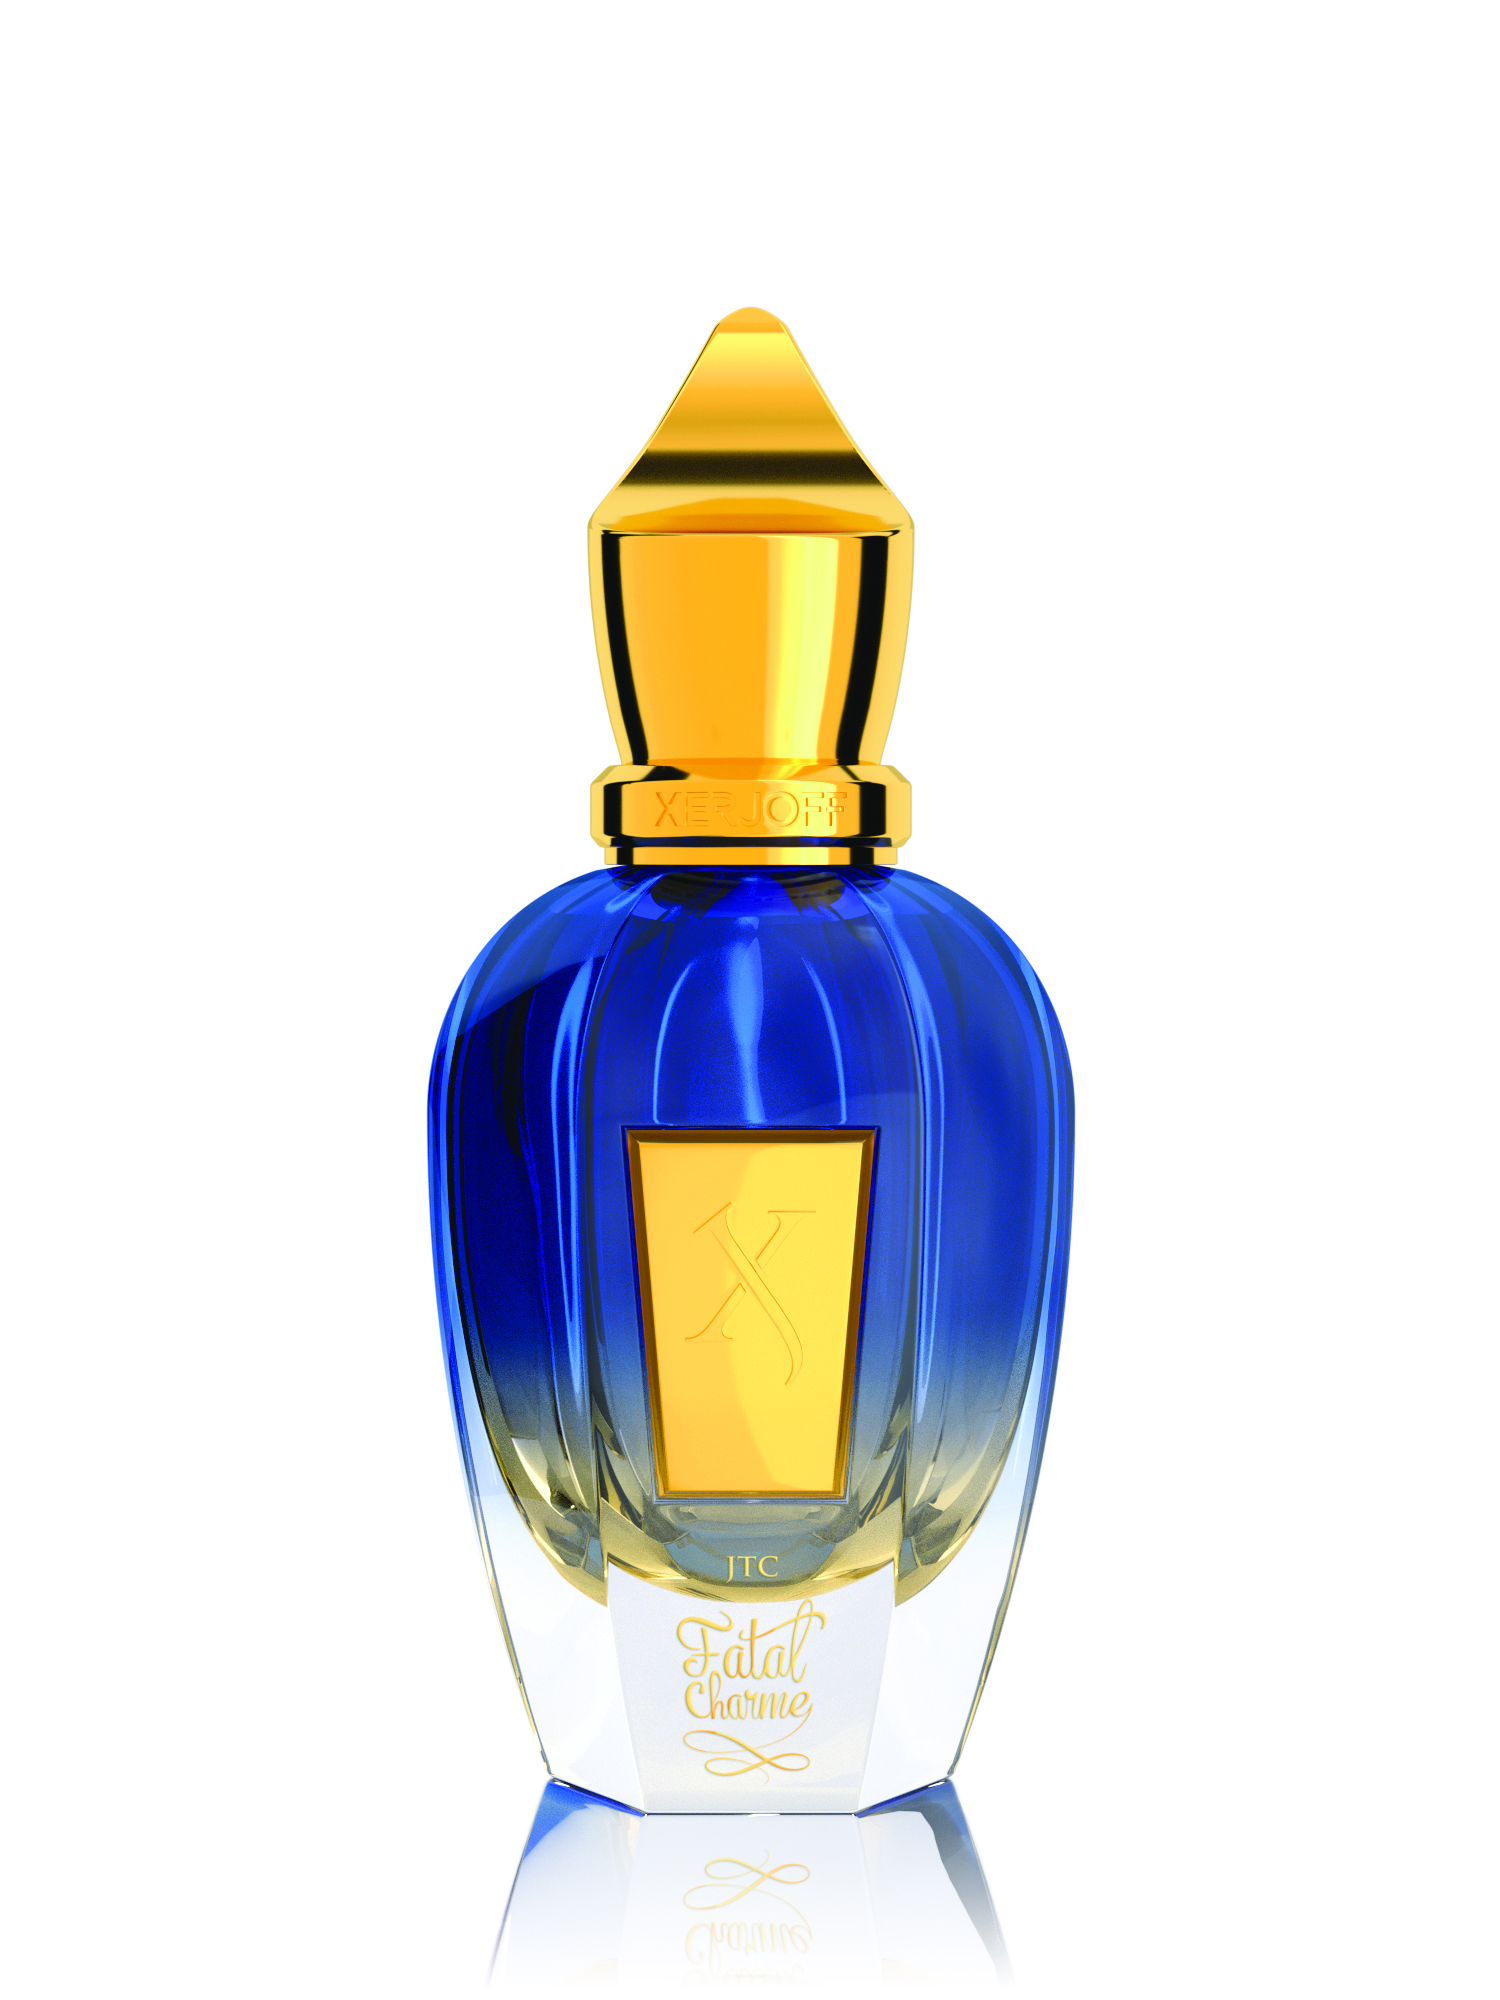 Fatal Charme Xerjoff perfume - a fragrance for women and men 2012